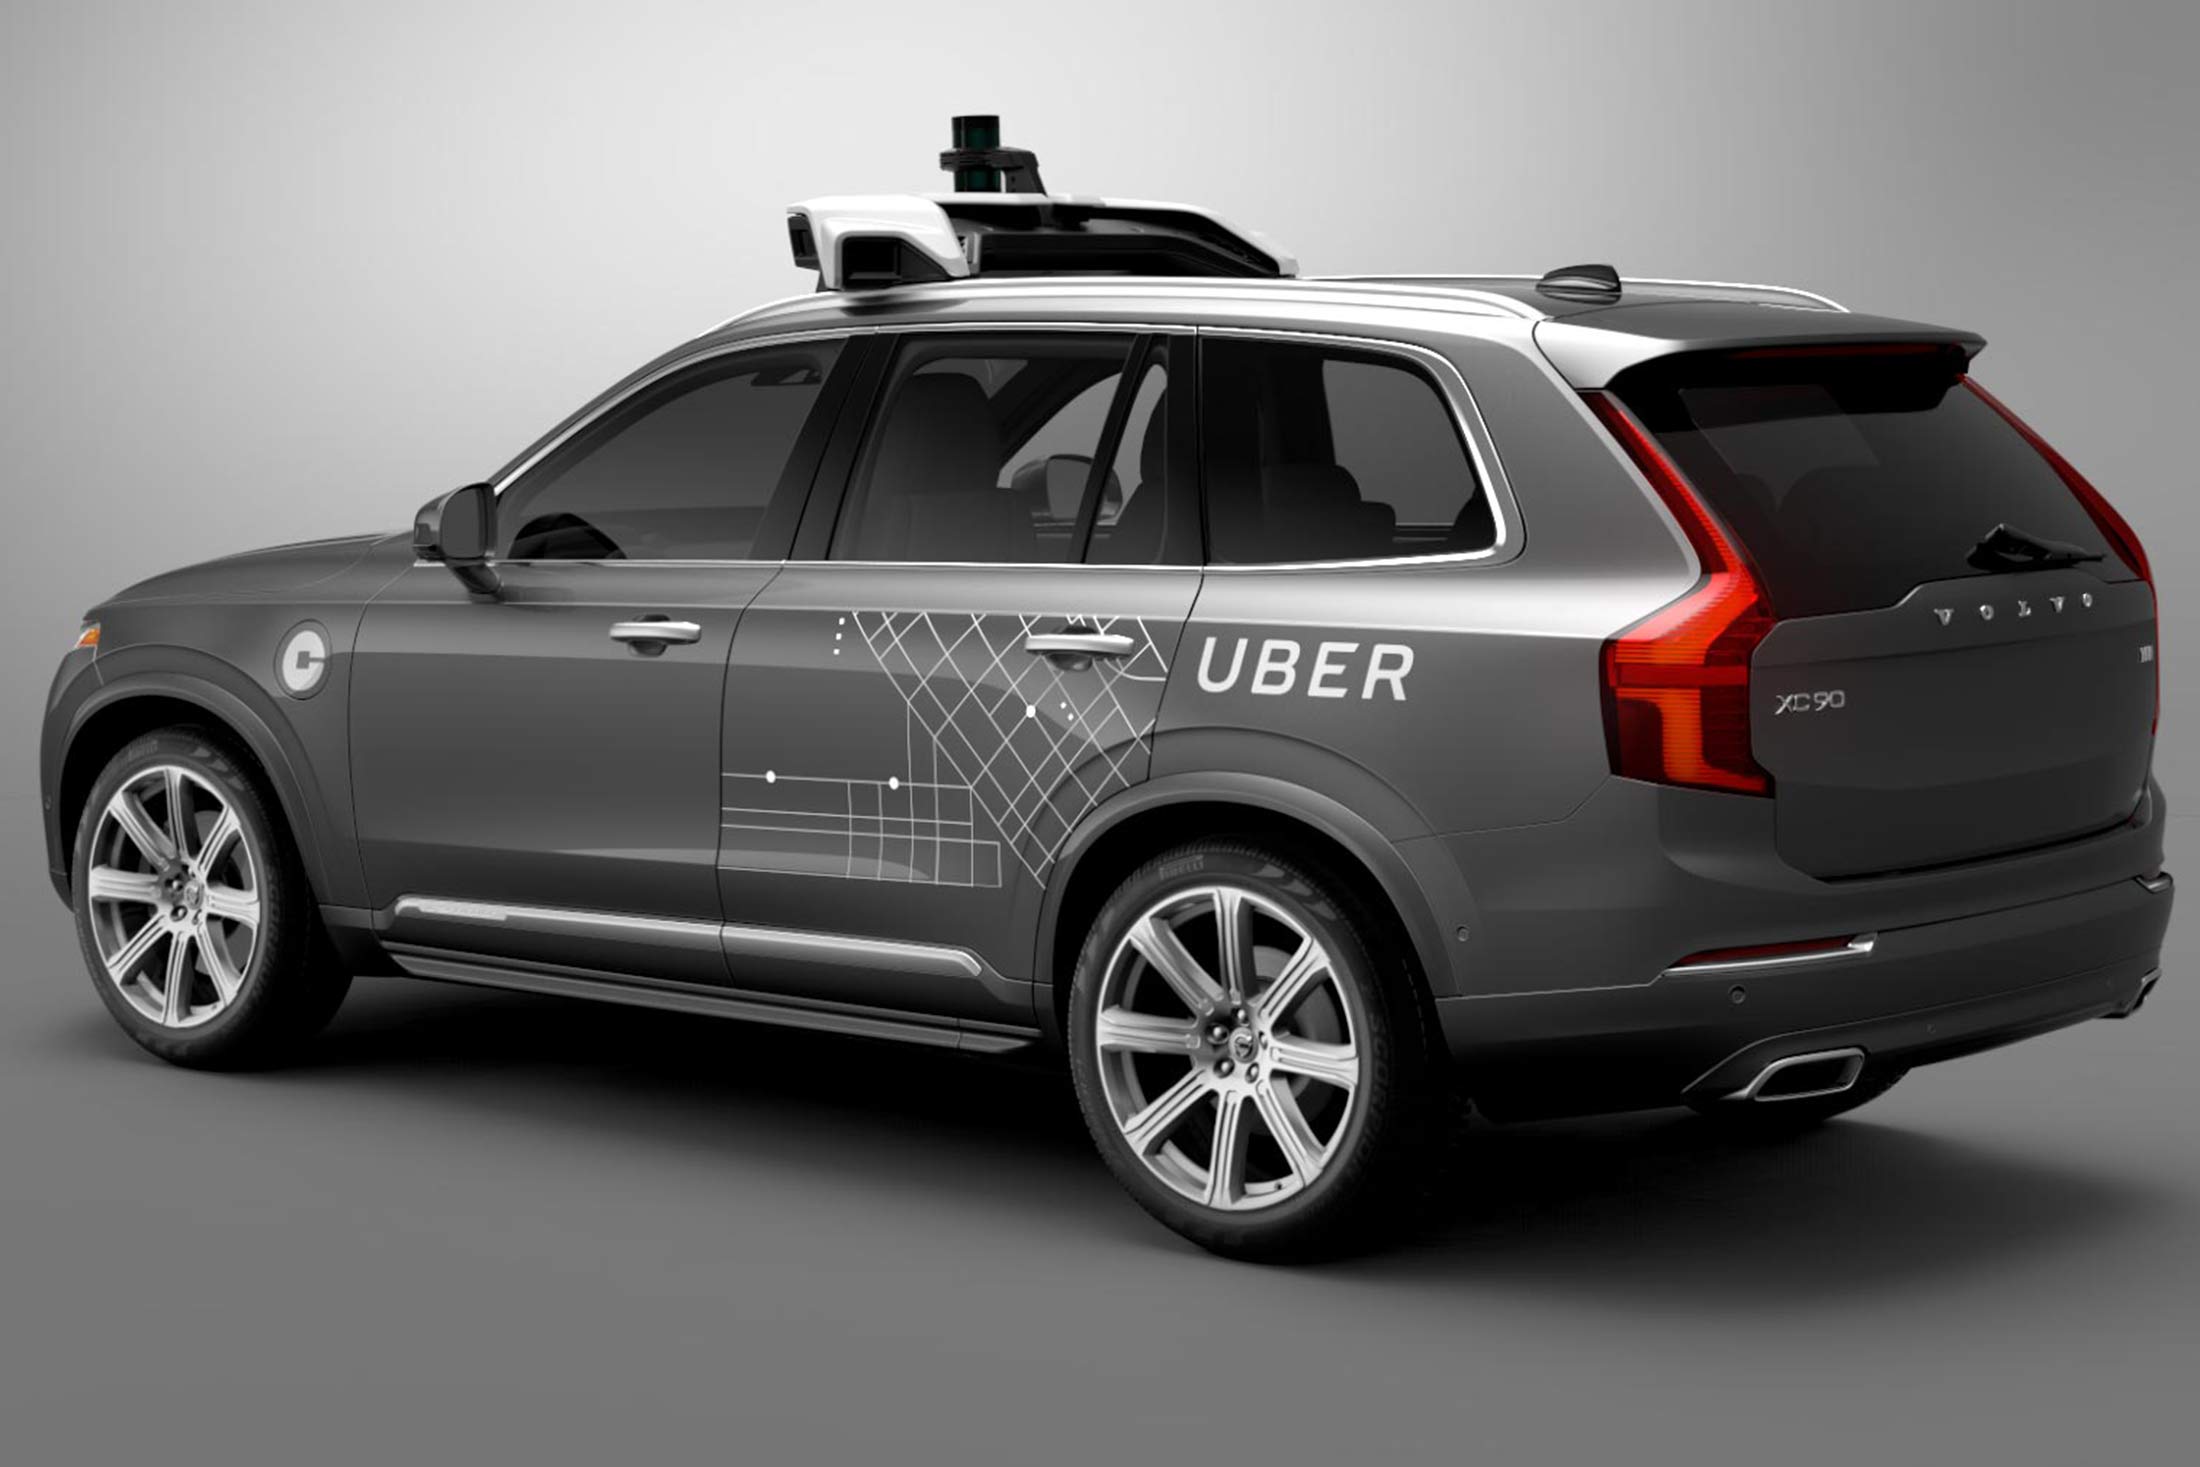 Uber self-driving car, developed by Volvo